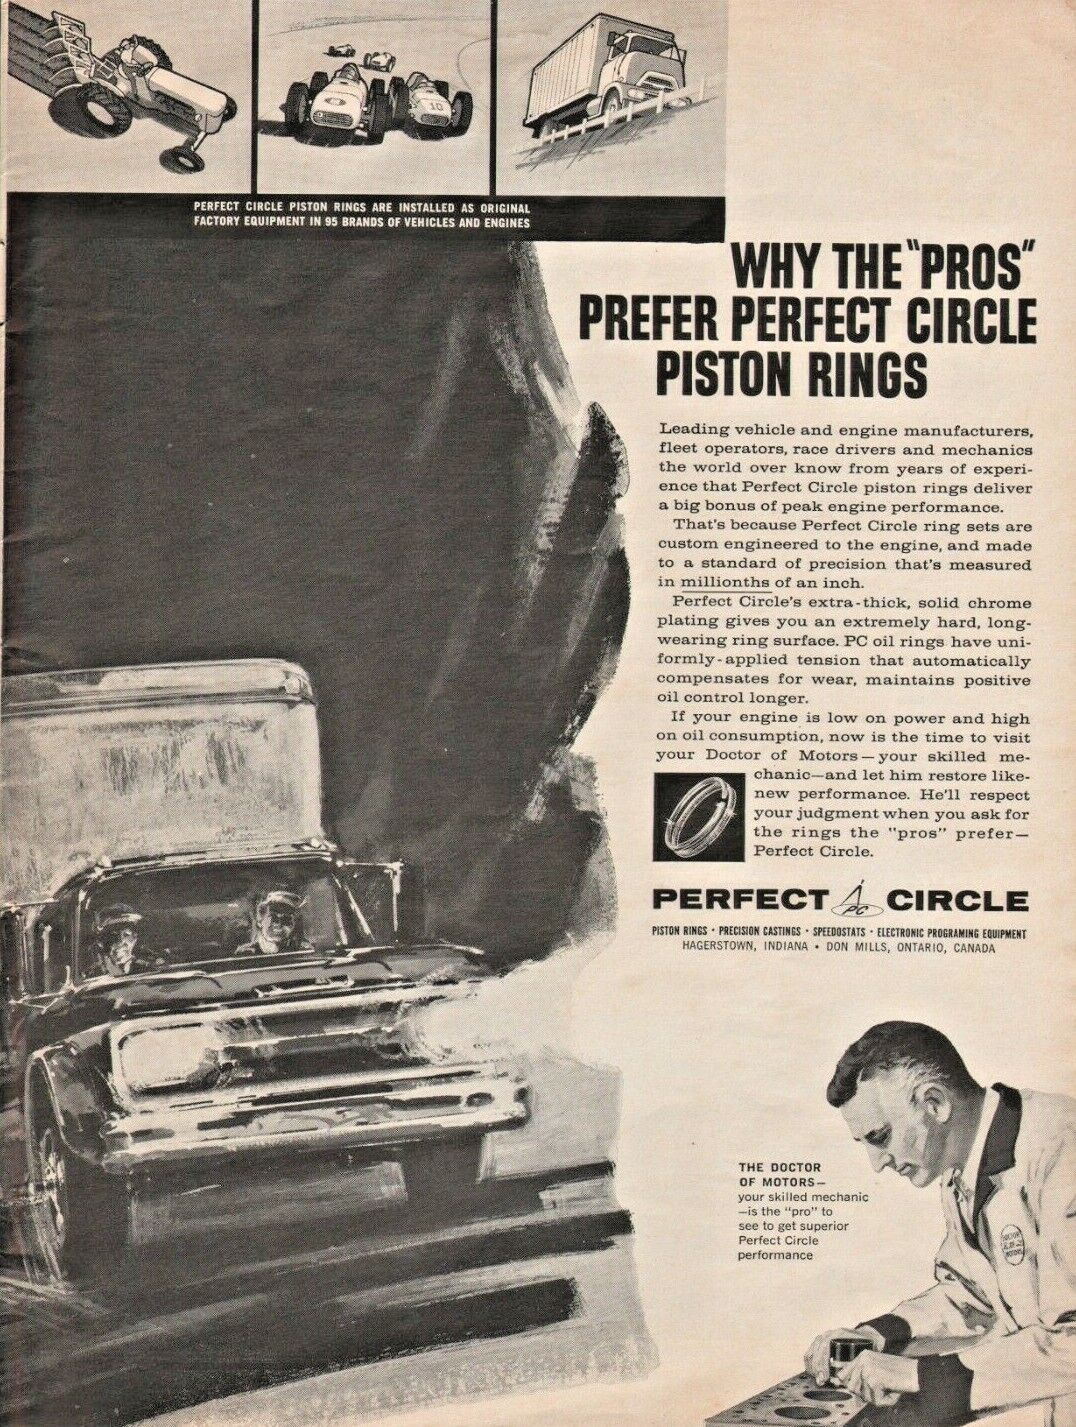 1962 Perfect Circle Piston Rings Hagerstown Indiana - Vintage Automobile Ad